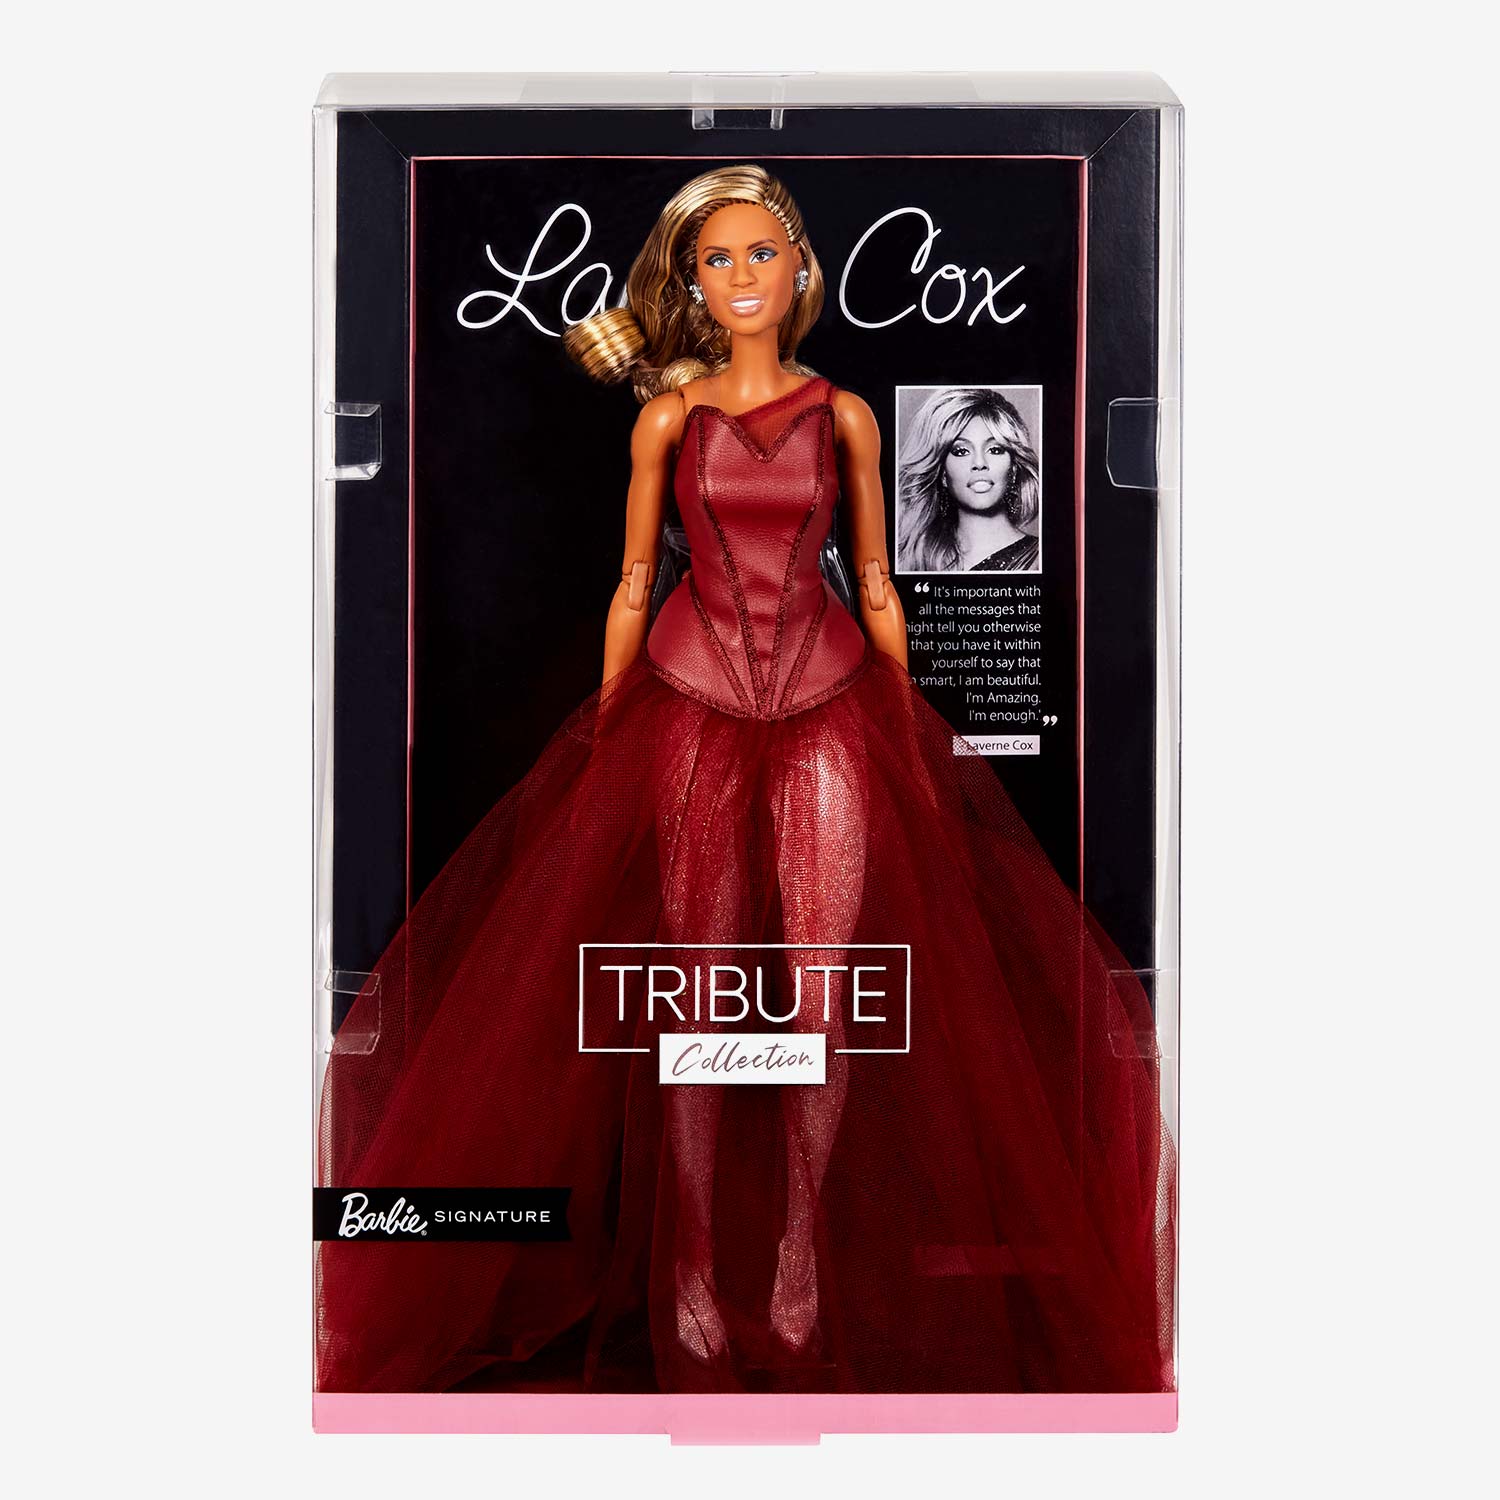 Laverne Cox tribute Barbie doll in packaging